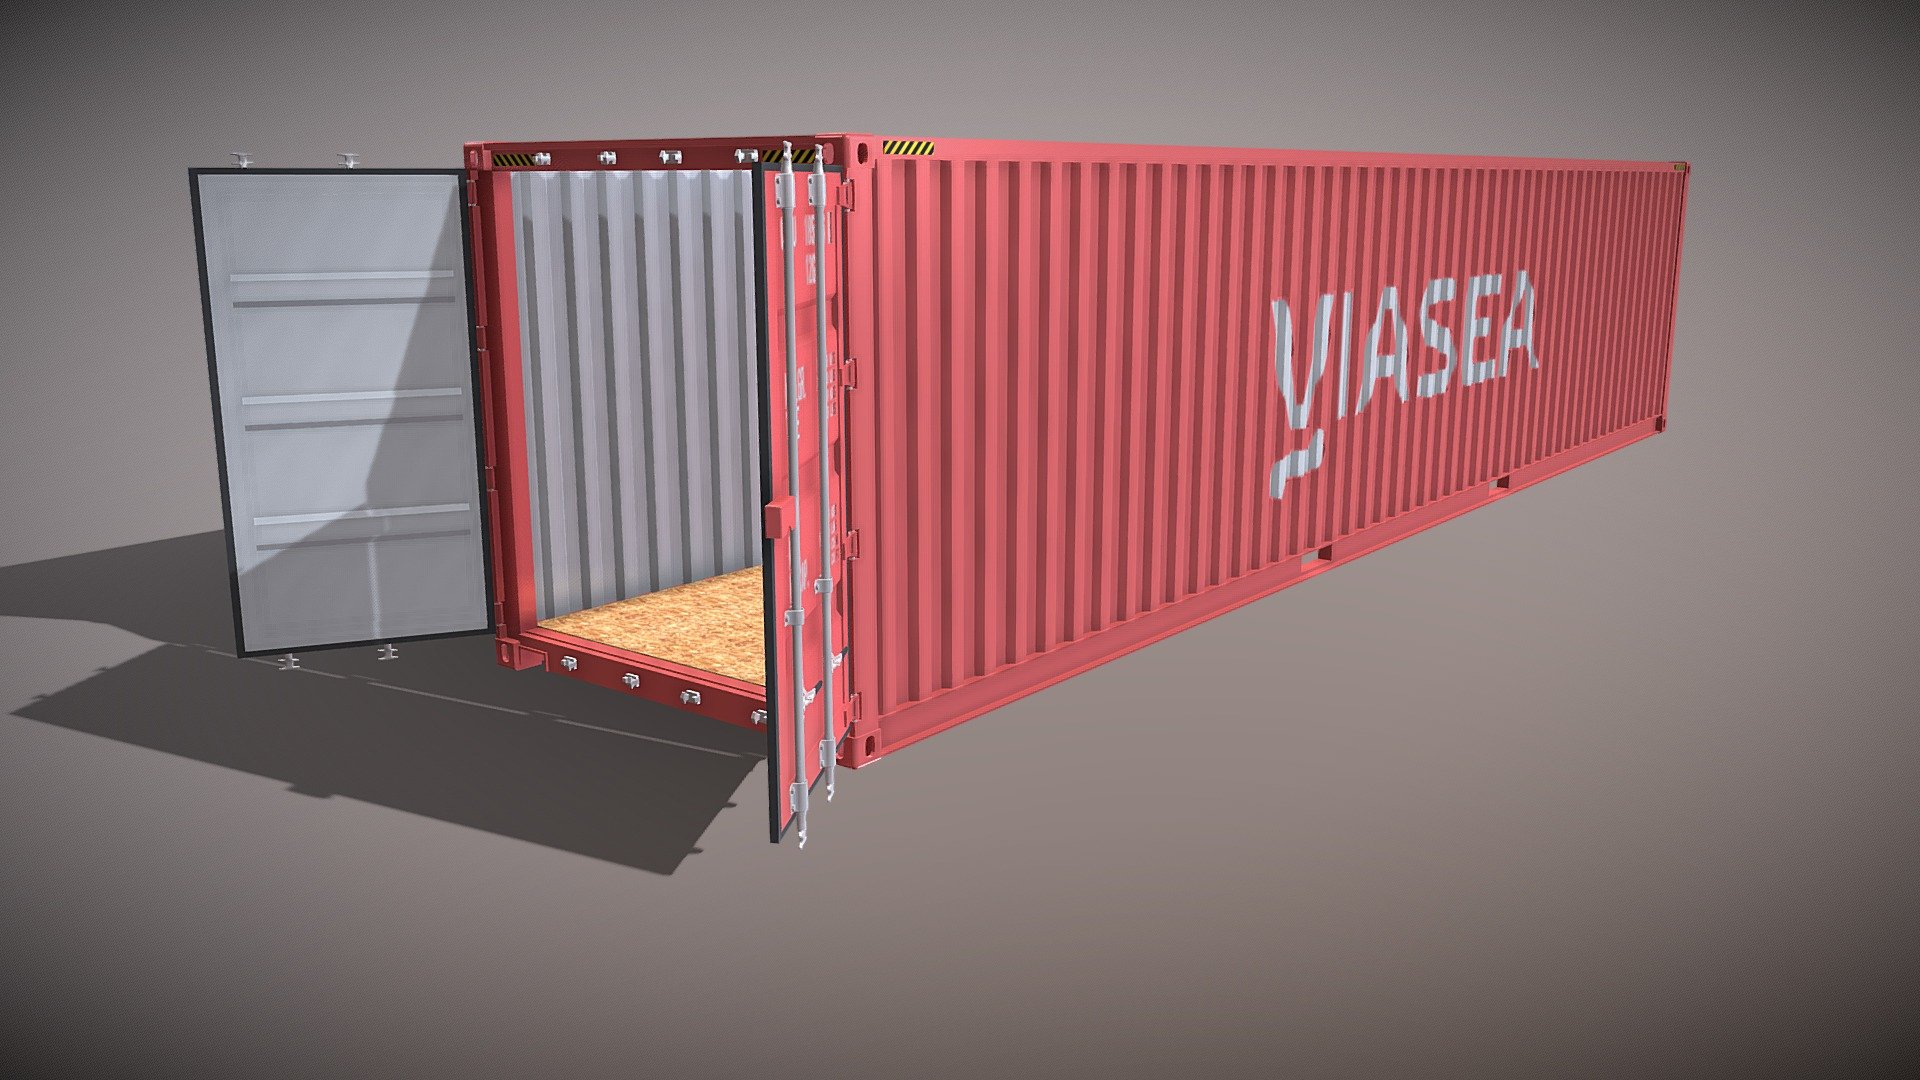 40ft Shipping Container 3d model rendered with Cycles in Blender, as per seen on attached images. 

File formats:
-.blend, rendered with cycles, as seen in the images;
-.obj, with materials applied;
-.dae, with materials applied;
-.fbx, with materials applied;
-.stl;

-.blend, with doors open, rendered with cycles, as seen in the images;
-.obj, with doors open, with materials applied;
-.dae, with doors open, with materials applied;
-.fbx, with doors open, with materials applied;
-.stl;

Files come named appropriately and split by file format.

3D Software:
The 3D model was originally created in Blender 2.8 and rendered with Cycles.

Materials and textures:
The models have materials applied in all formats, and are ready to import and render.
The model comes with two png image textures.

Don't forget to rate and enjoy! - 40ft Shipping Container Viasea - Buy Royalty Free 3D model by dragosburian 3d model